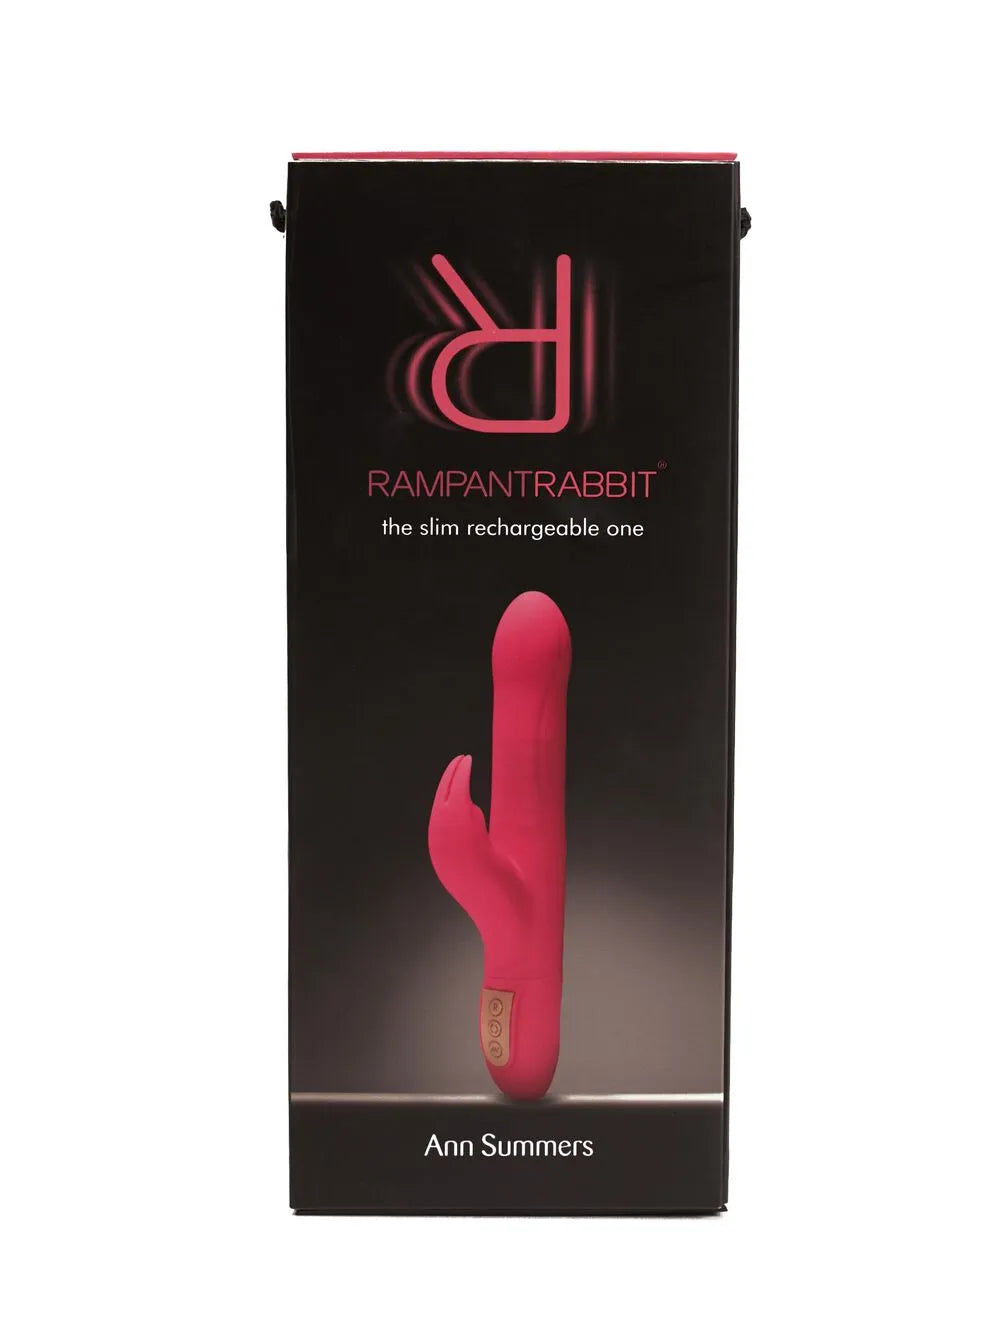 The Slim Rechargeable One